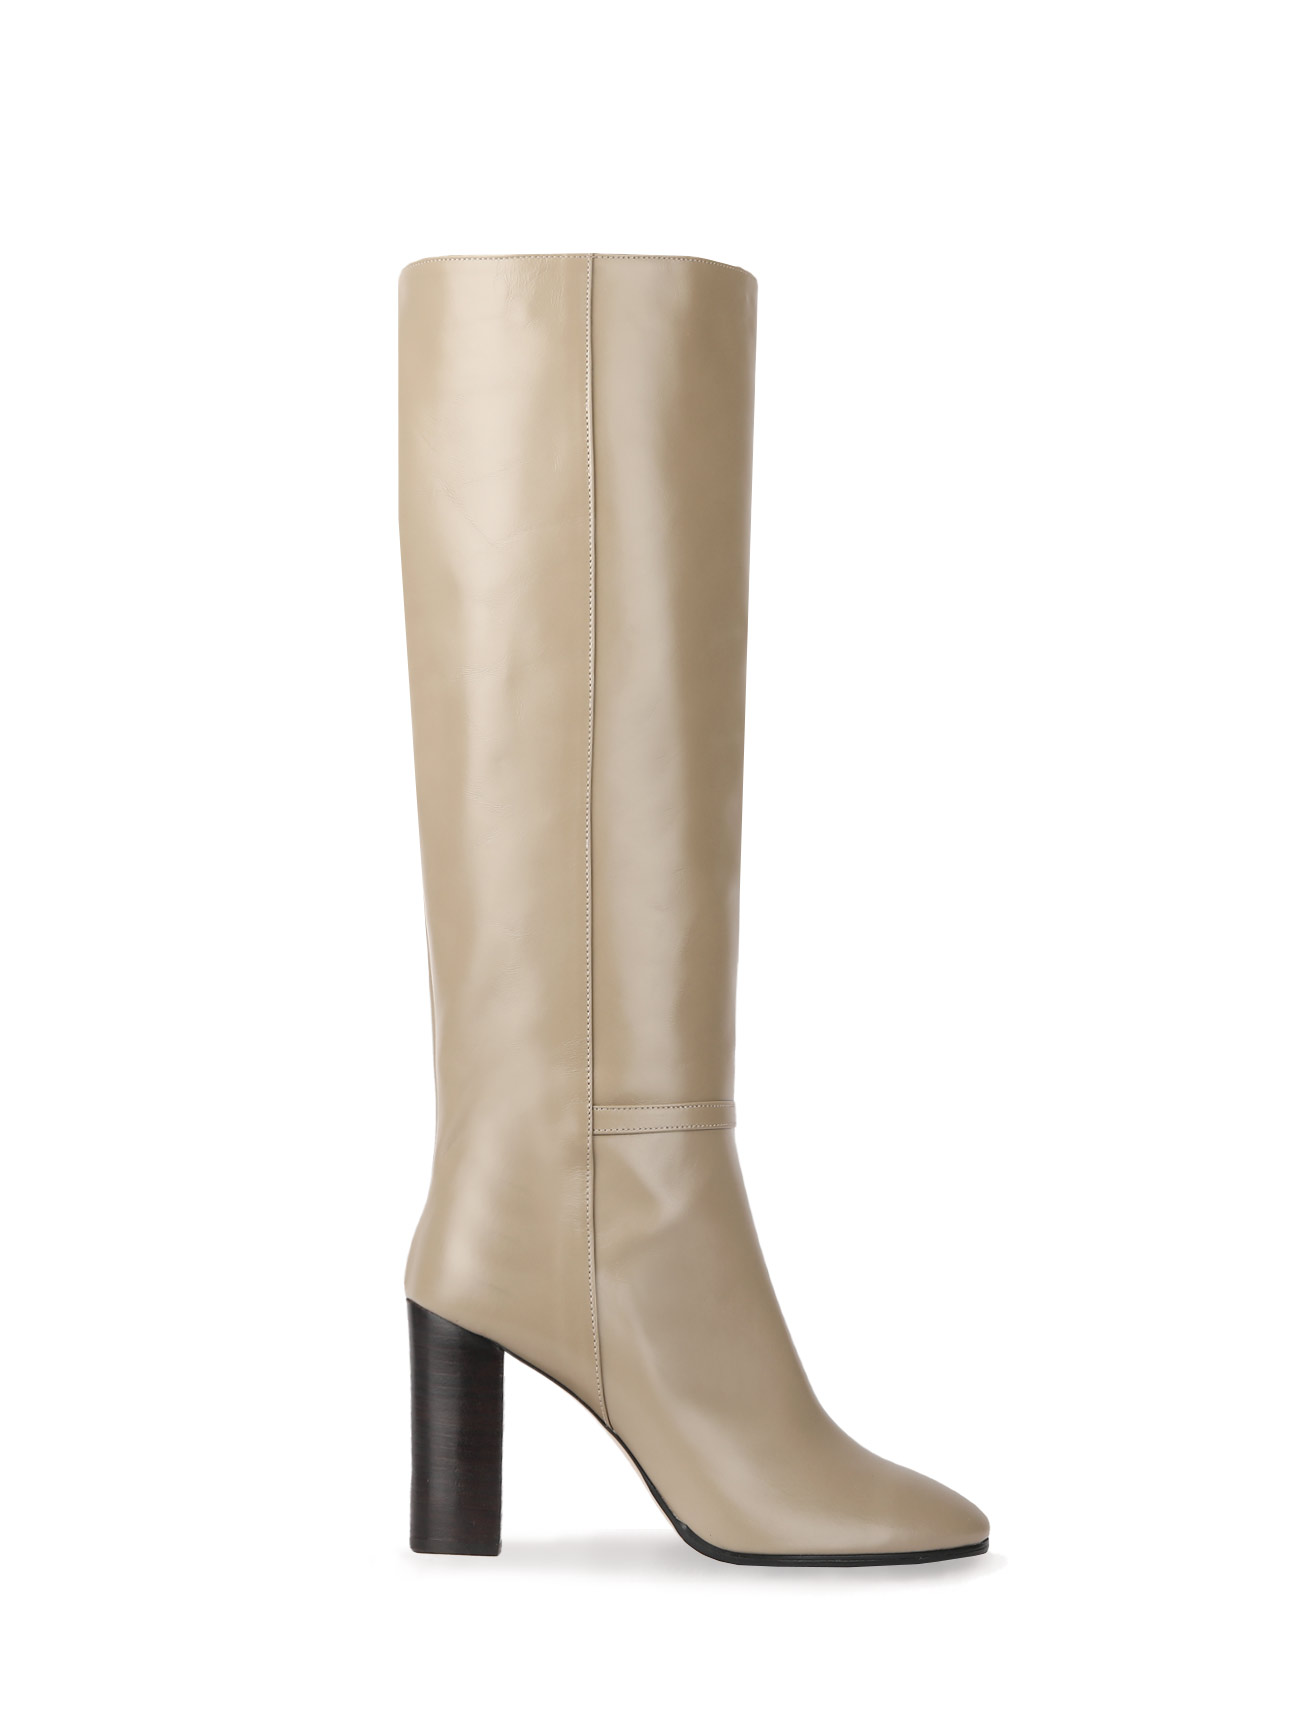 KATE LEATHER KNEE BOOTS - OLIVE